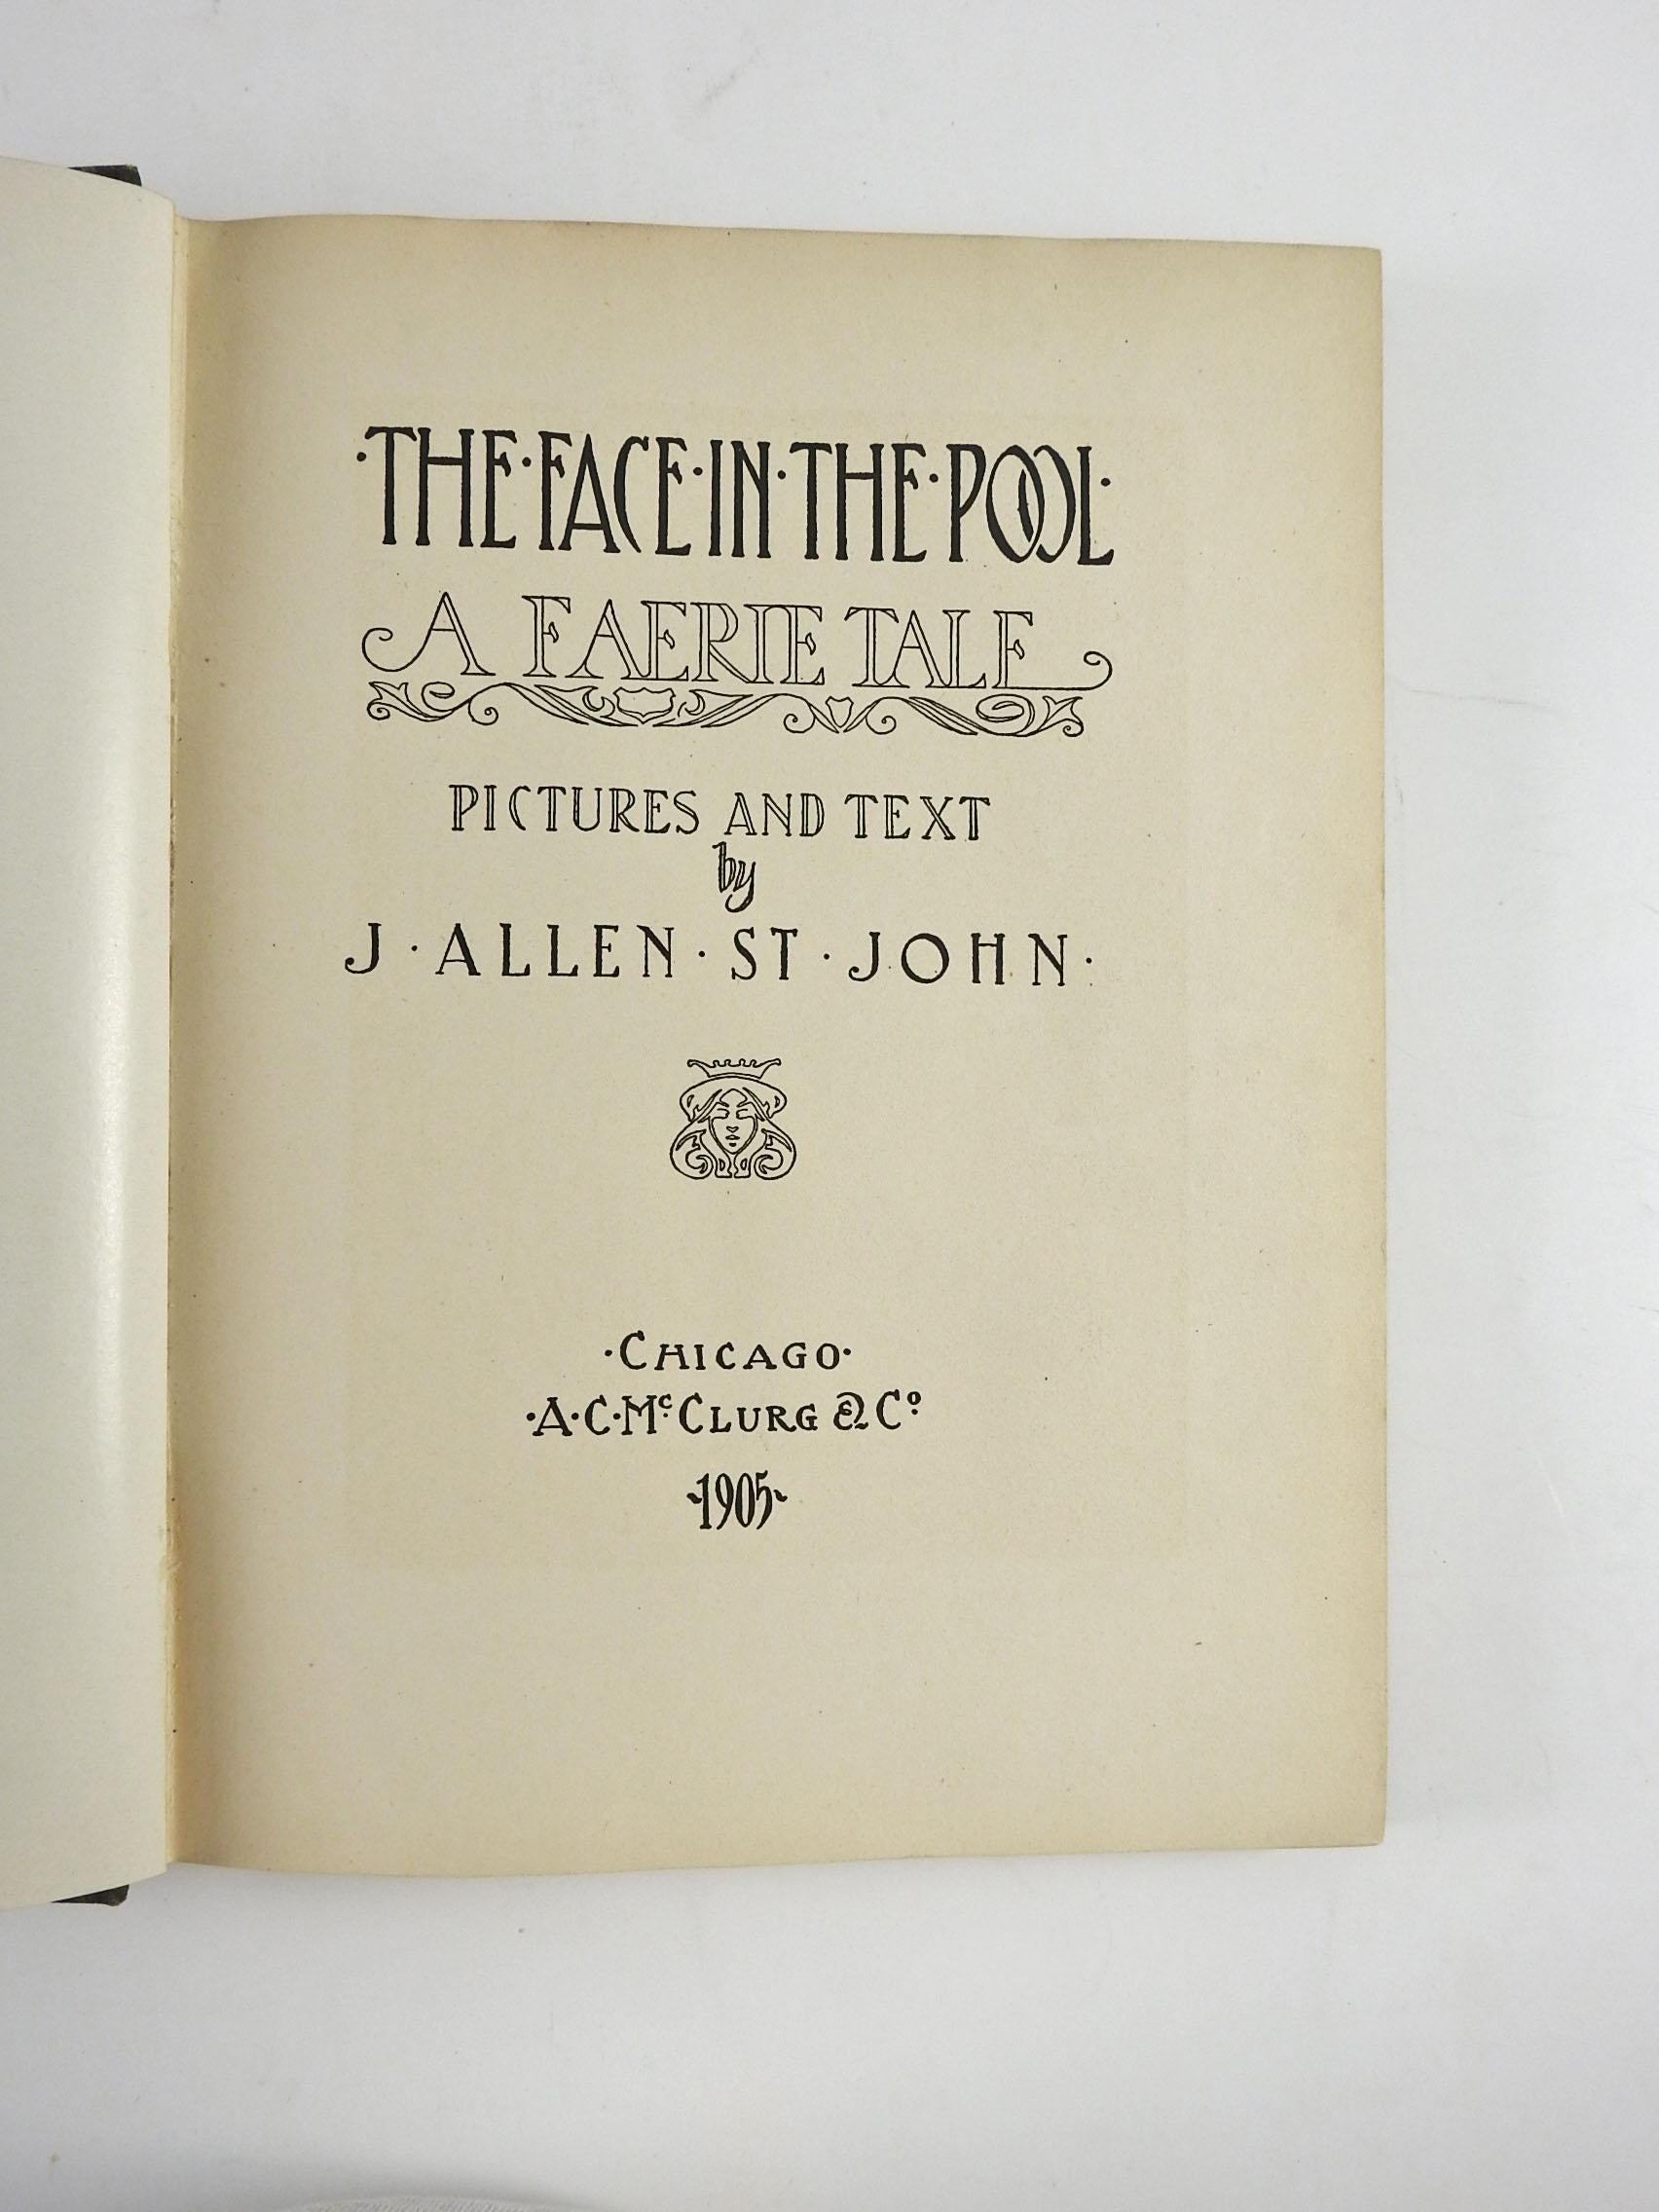 The Face in the Pool: A Faerie Tale by J. Allen St. John, also illustrated by the author. A. C. Mcclurg & Co., Chicago, 1905.  James Allen St. John (1872-1957) was an American author, artist, and illustrator. He is known for his illustrations for